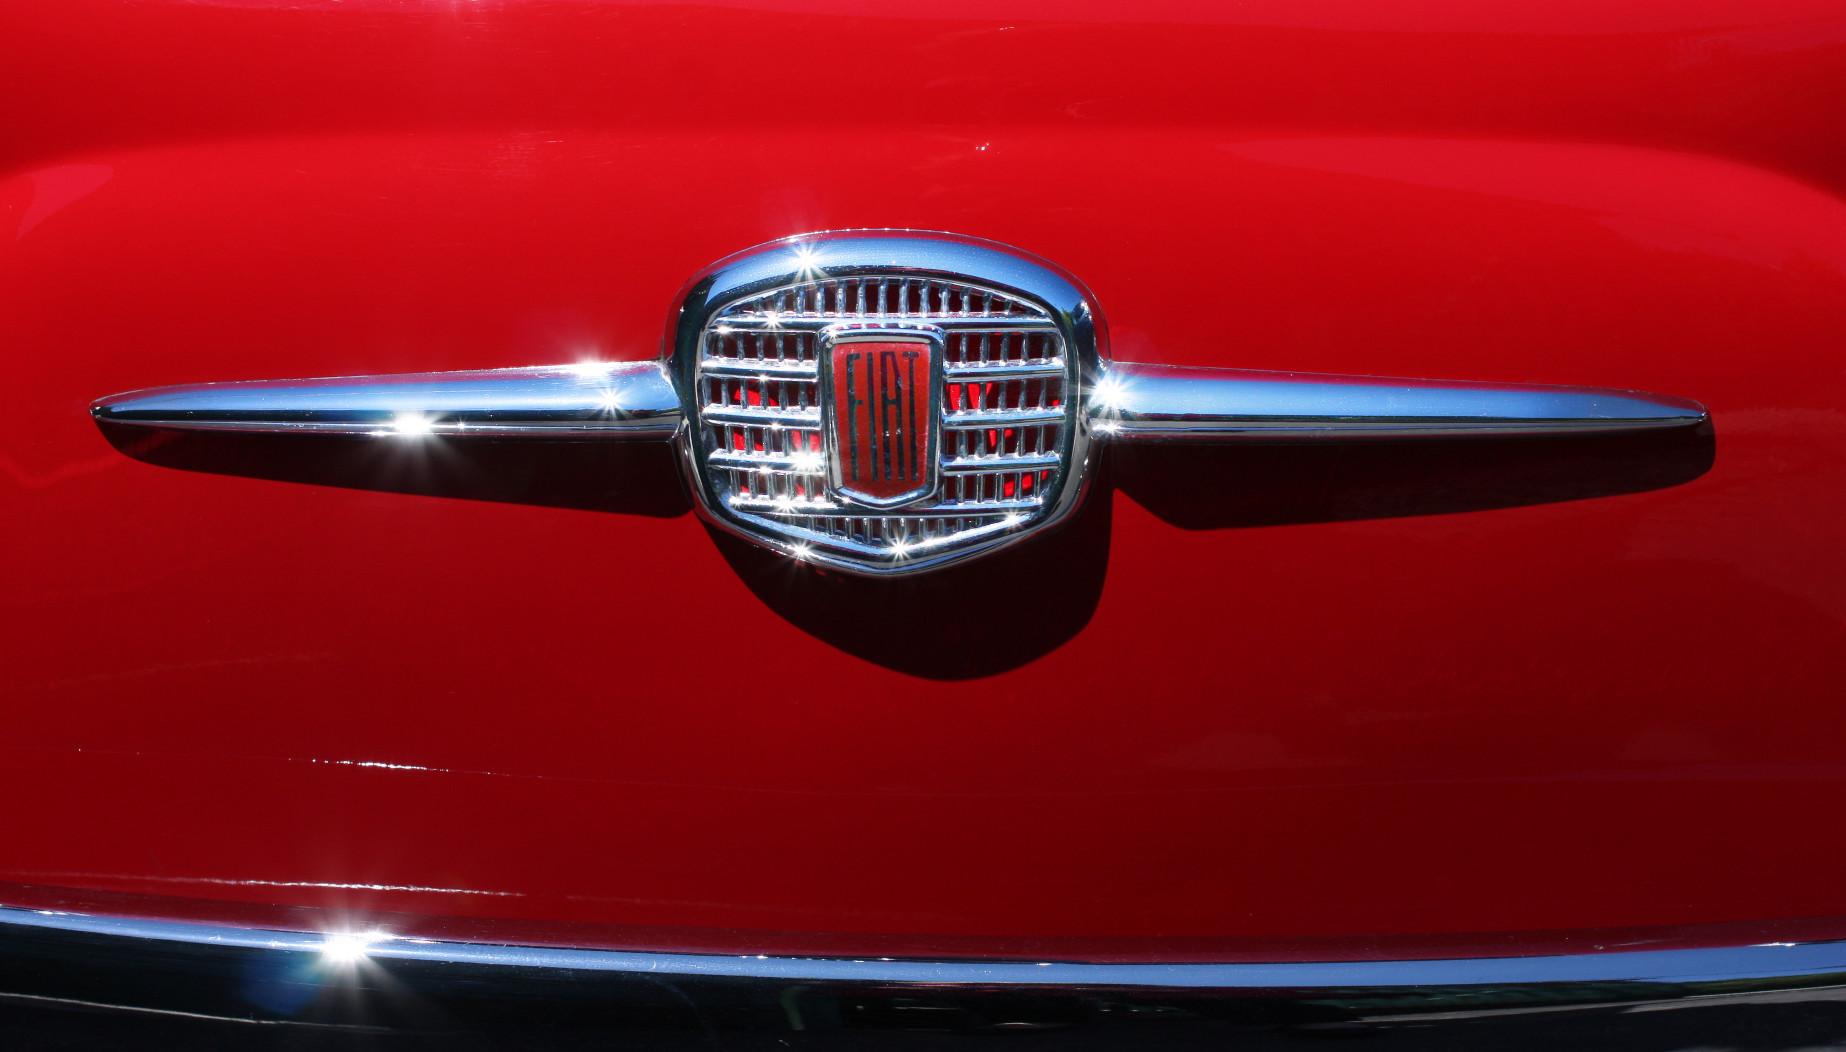 A Fiat logo on the hood of a red car.